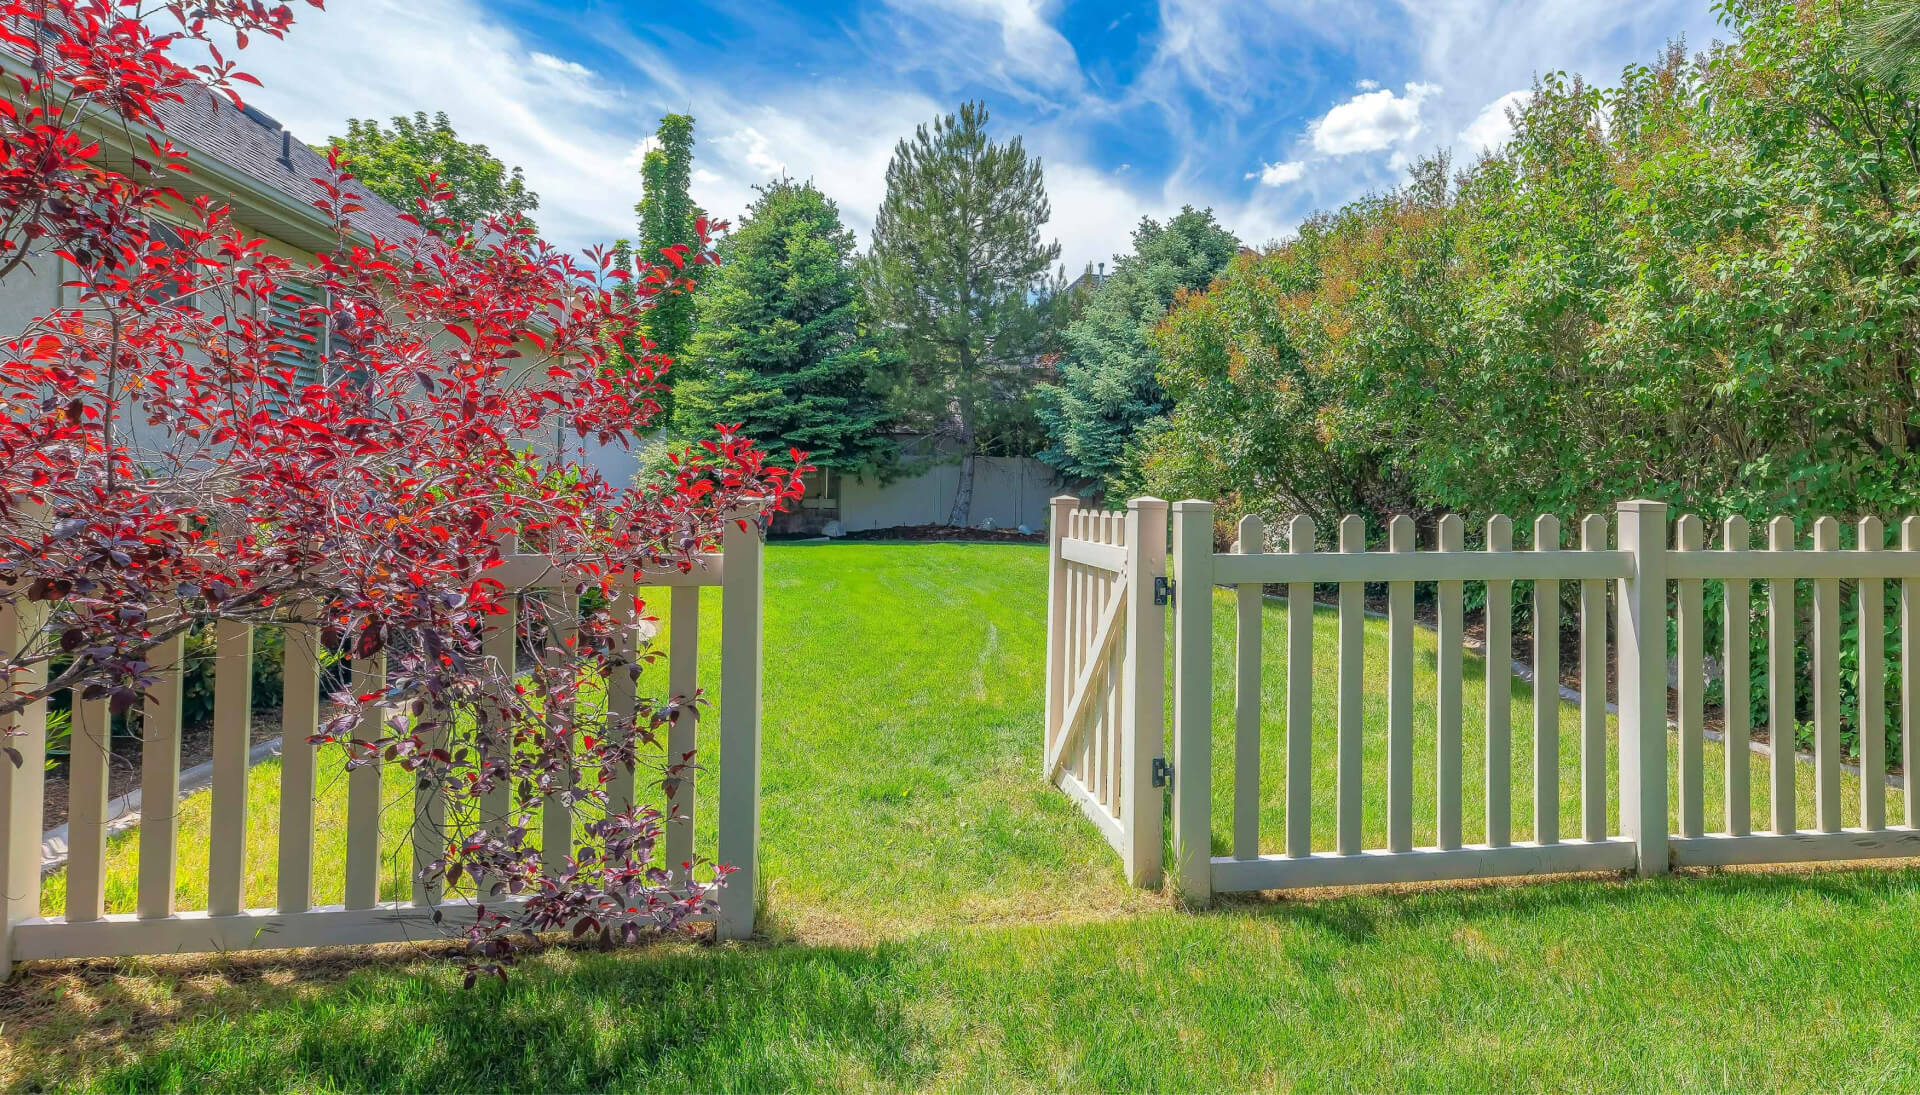 A functional fence gate providing access to a well-maintained backyard, surrounded by a wooden fence in Springfield